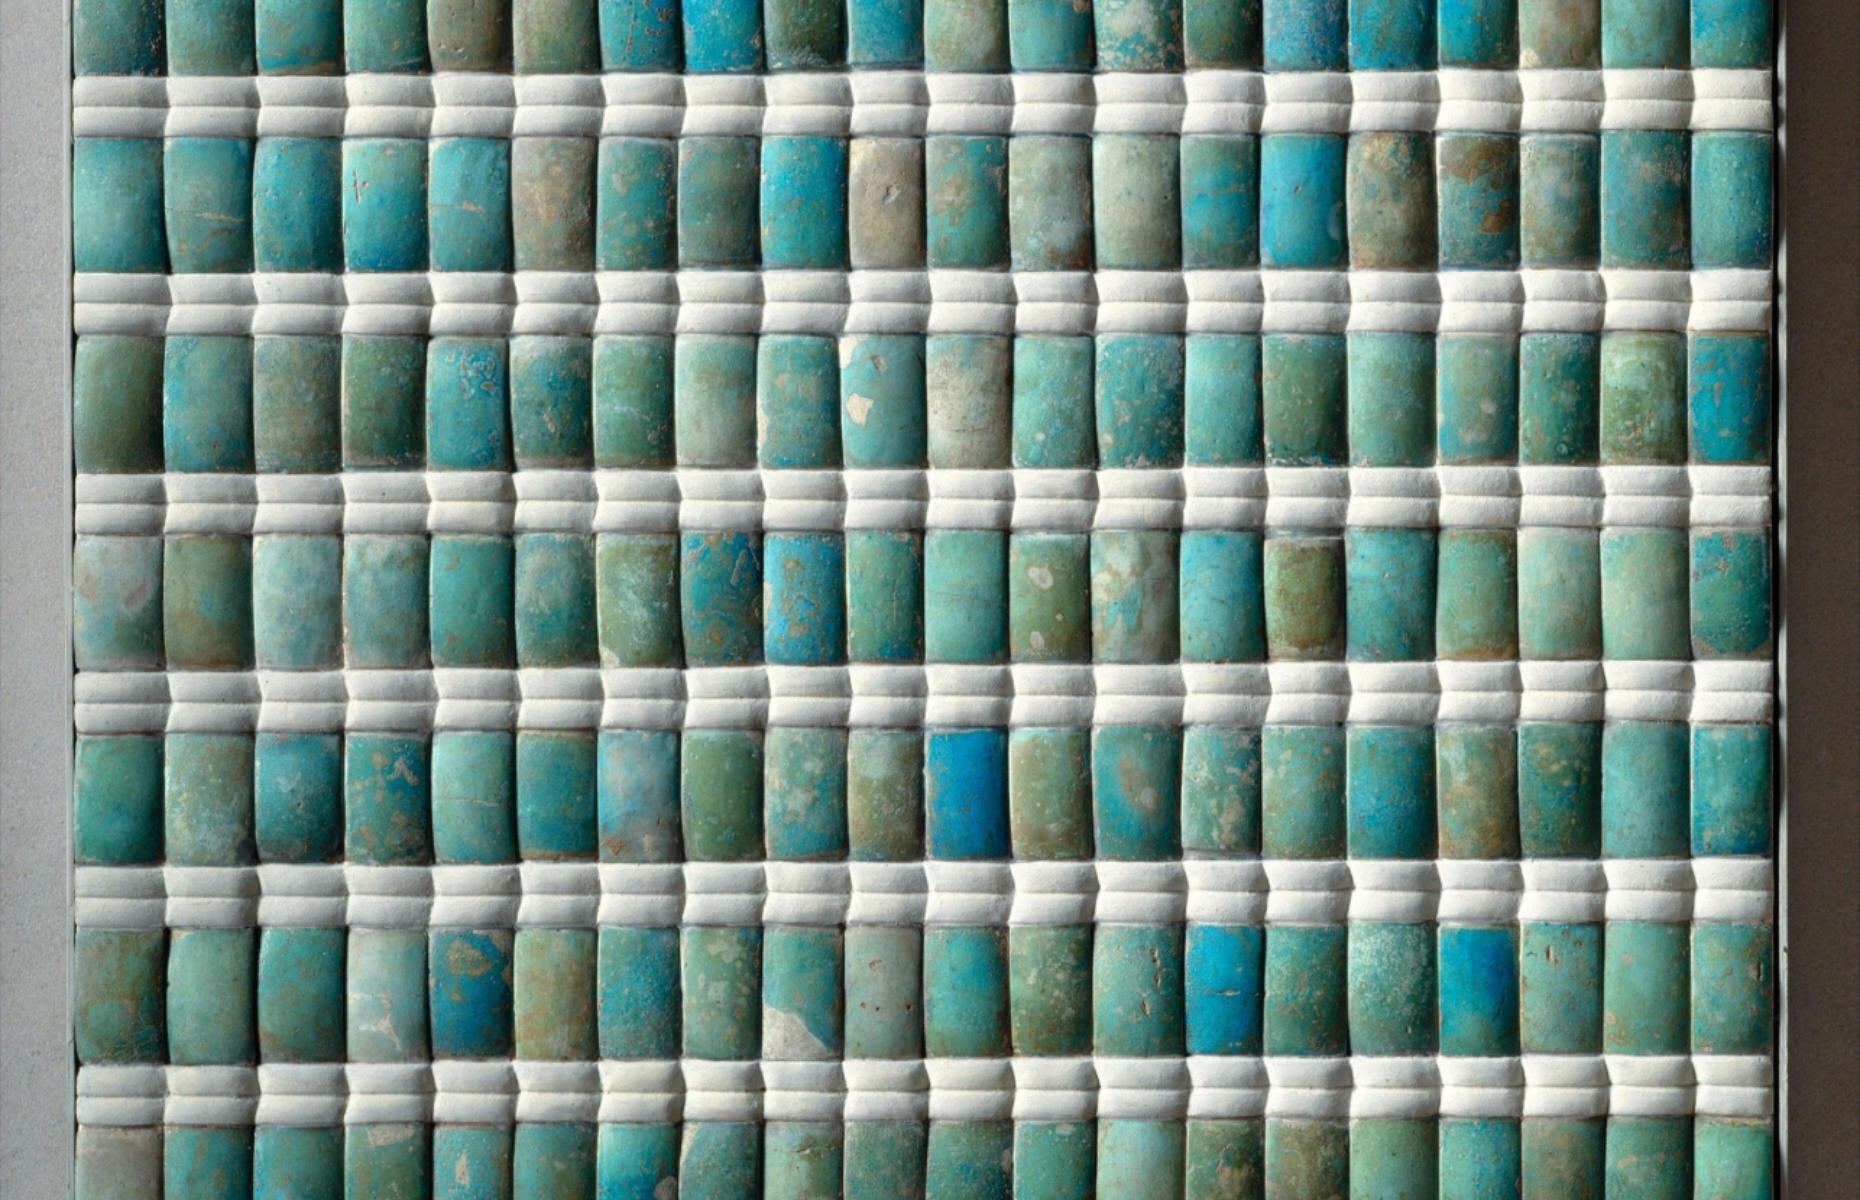 <p>A series of beautiful blue and green tiles were uncovered in the pyramid's galleries and burial chamber. These once lined the walls to imitate the decorative sheets of reeds that would originally have hung in the king’s royal palace, while the blue and green colours symbolised rebirth. The ceramic tiles were created in the faience glazing style, and restored sections are on display at the Imhotep Museum in Saqqara and the Metropolitan Museum of Art in New York.</p>